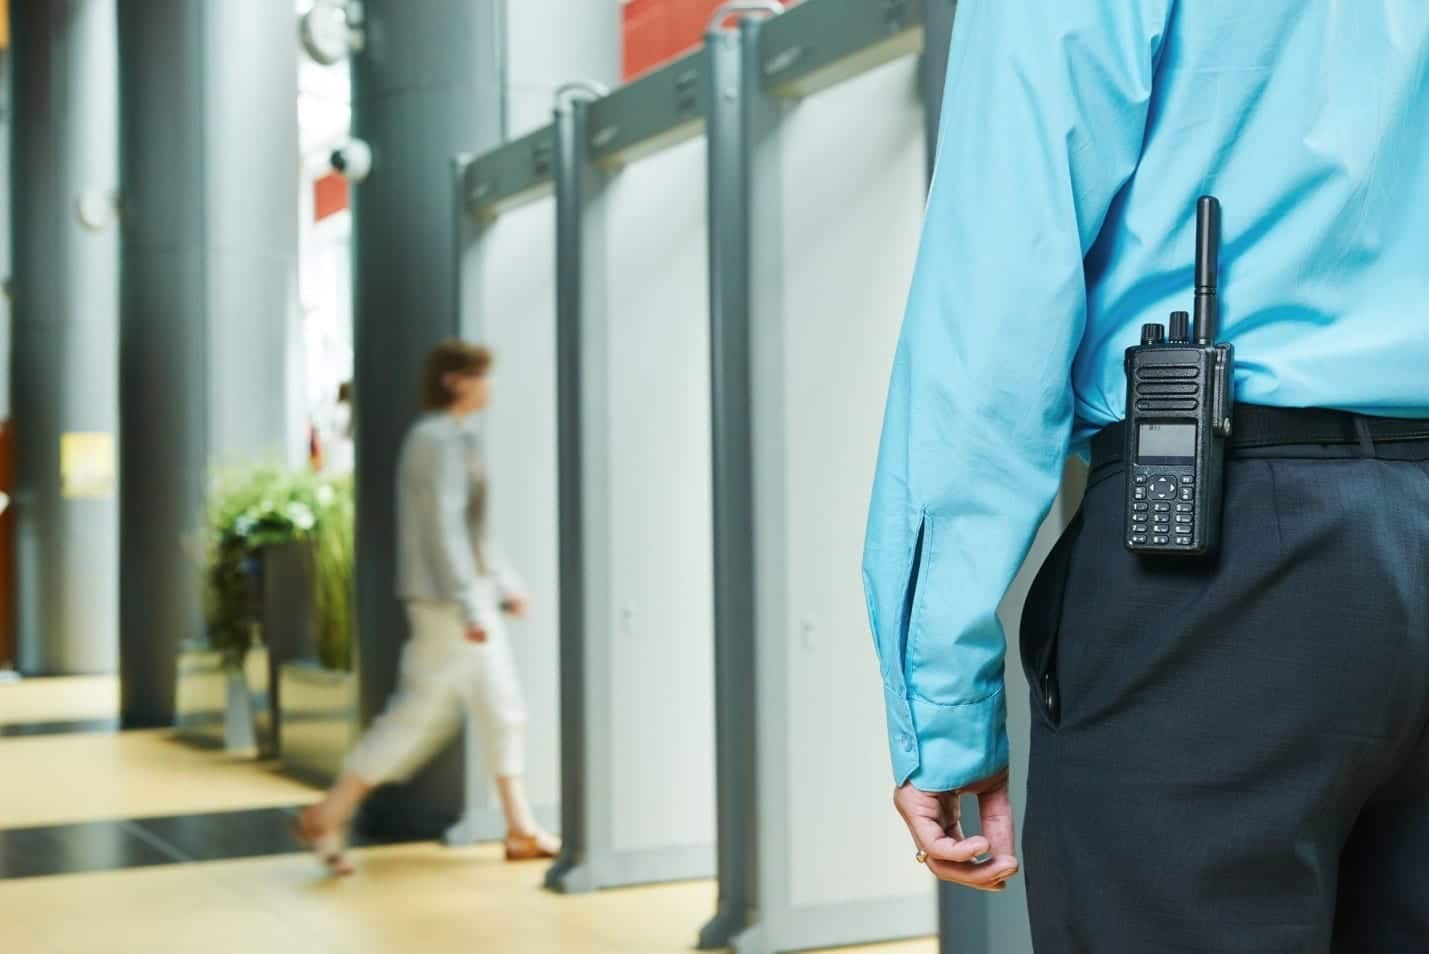 , 9 Common Shoplifting Techniques Authorities Watch For